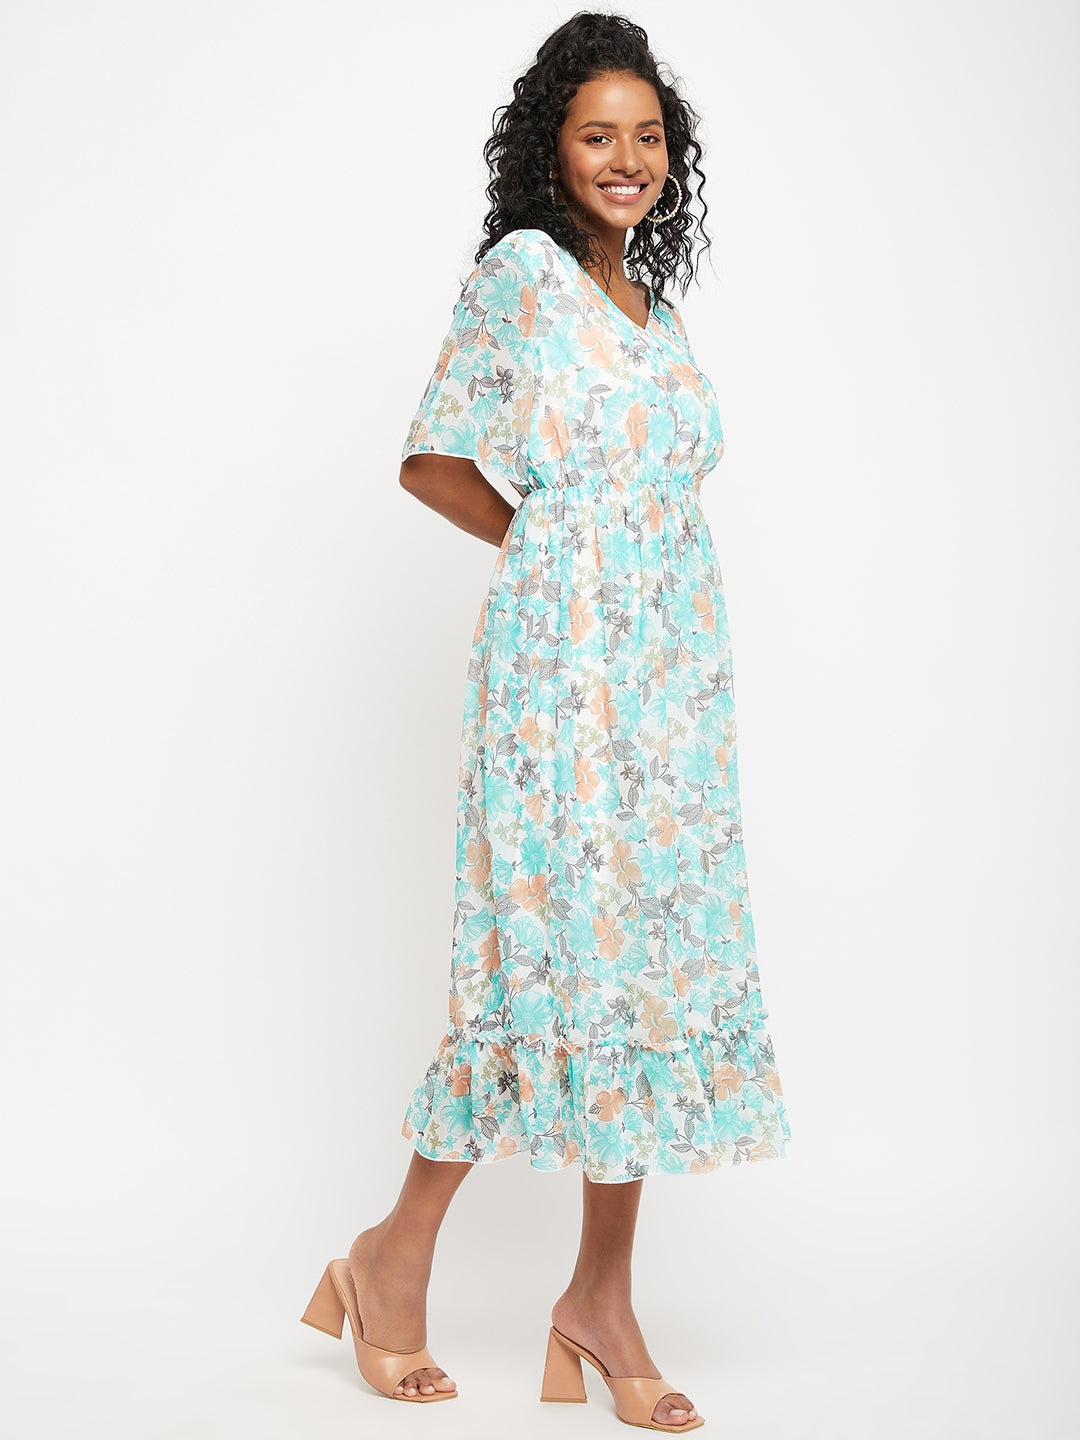 Floral Printed V-Neck Flared Sleeves Flounce Fit & Flare Midi Dress